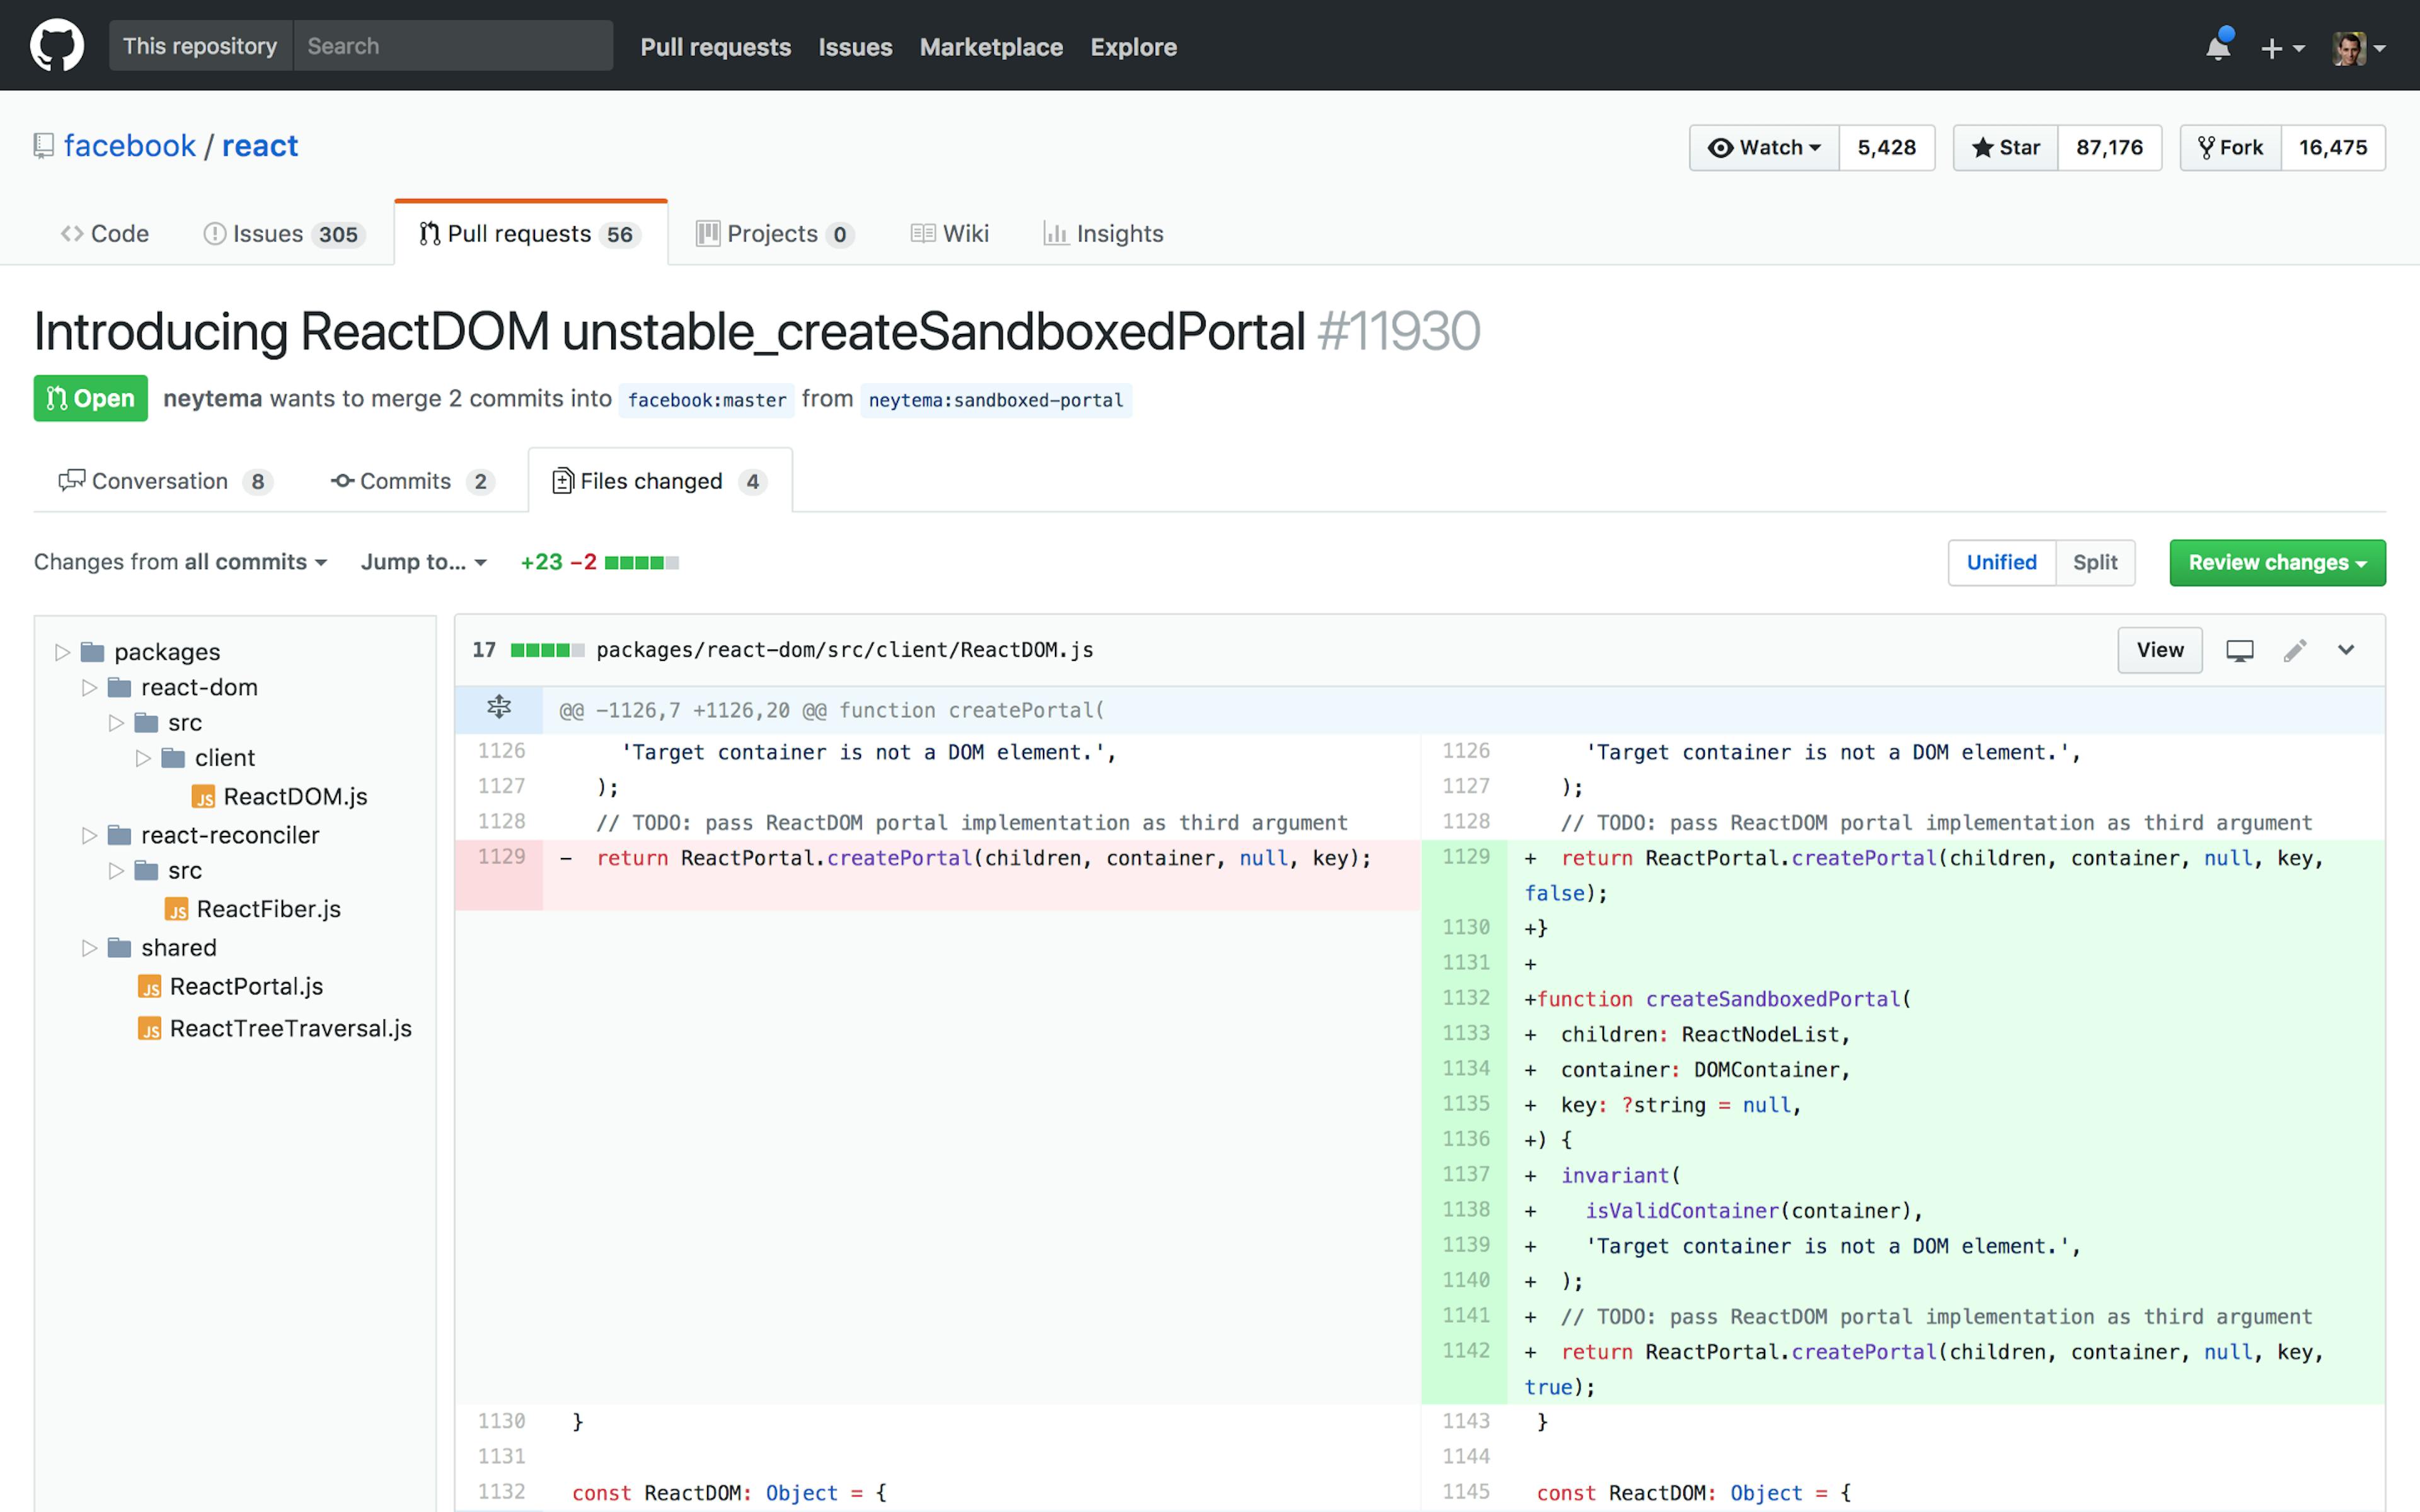 featured image - Adding the missing features to GitHub Pull Requests